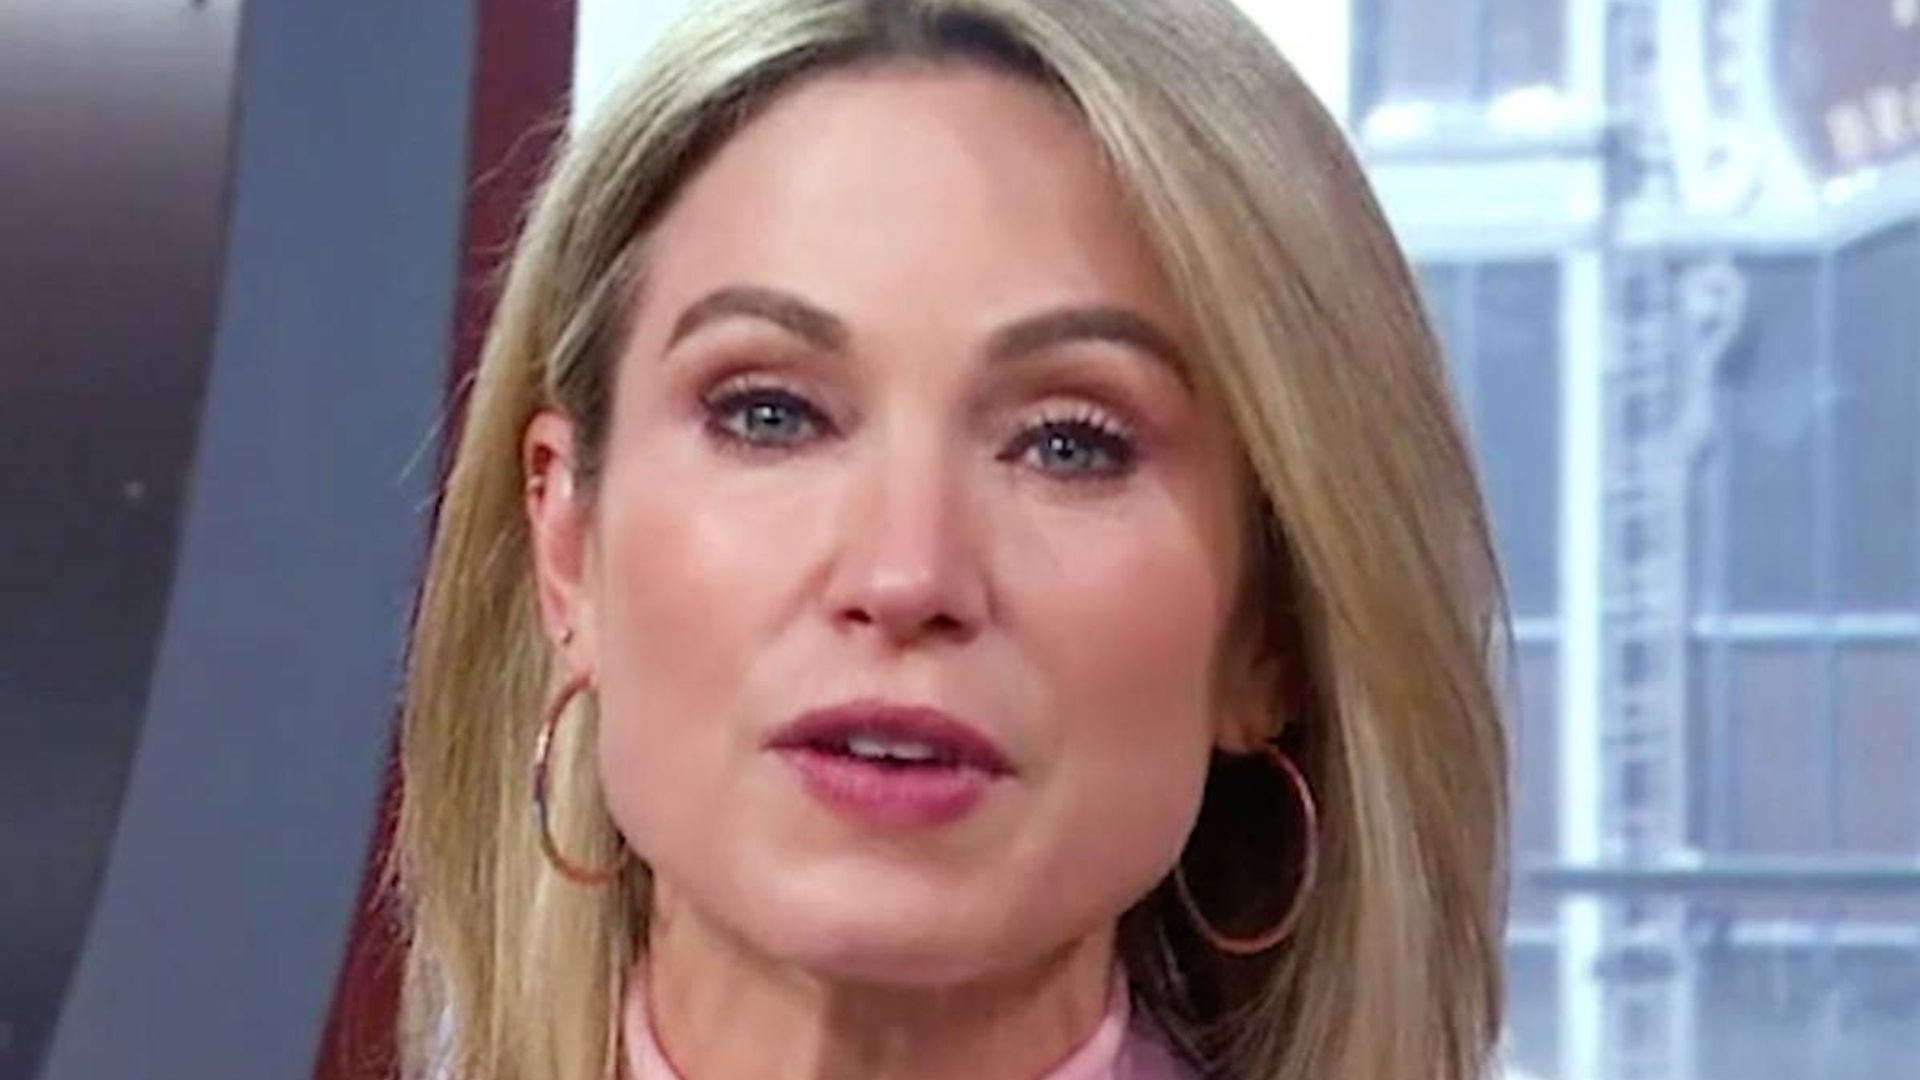 Amy Robach reflects on devastating health diagnosis in bittersweet post